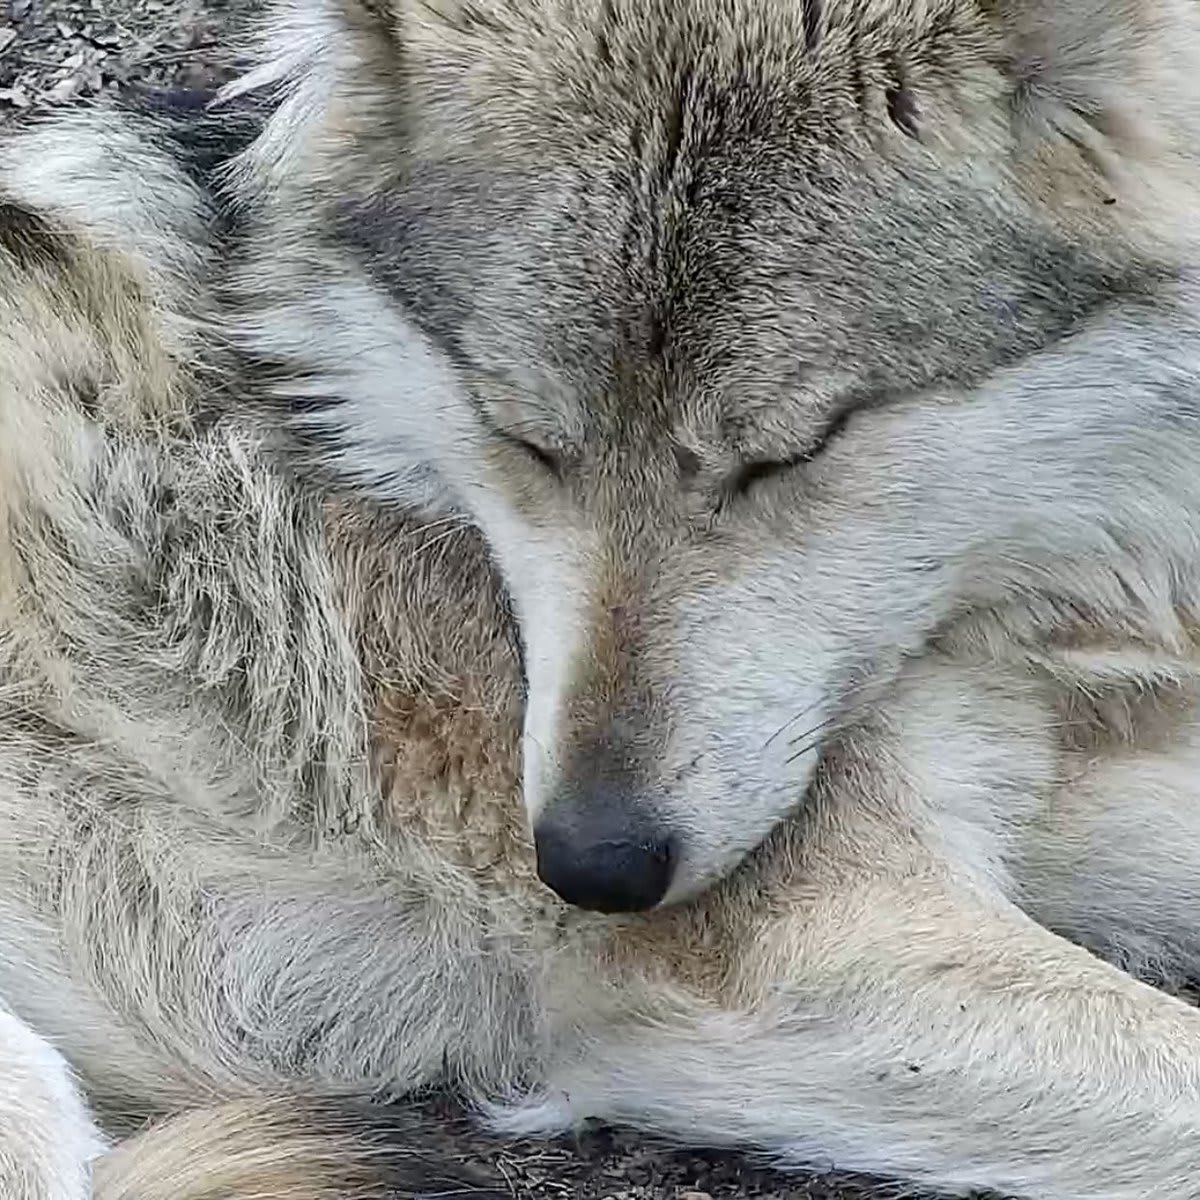 Dreaming of a world where no wolf species cowers on the edge of extinction Dream with Mexican gray wolf Bria: